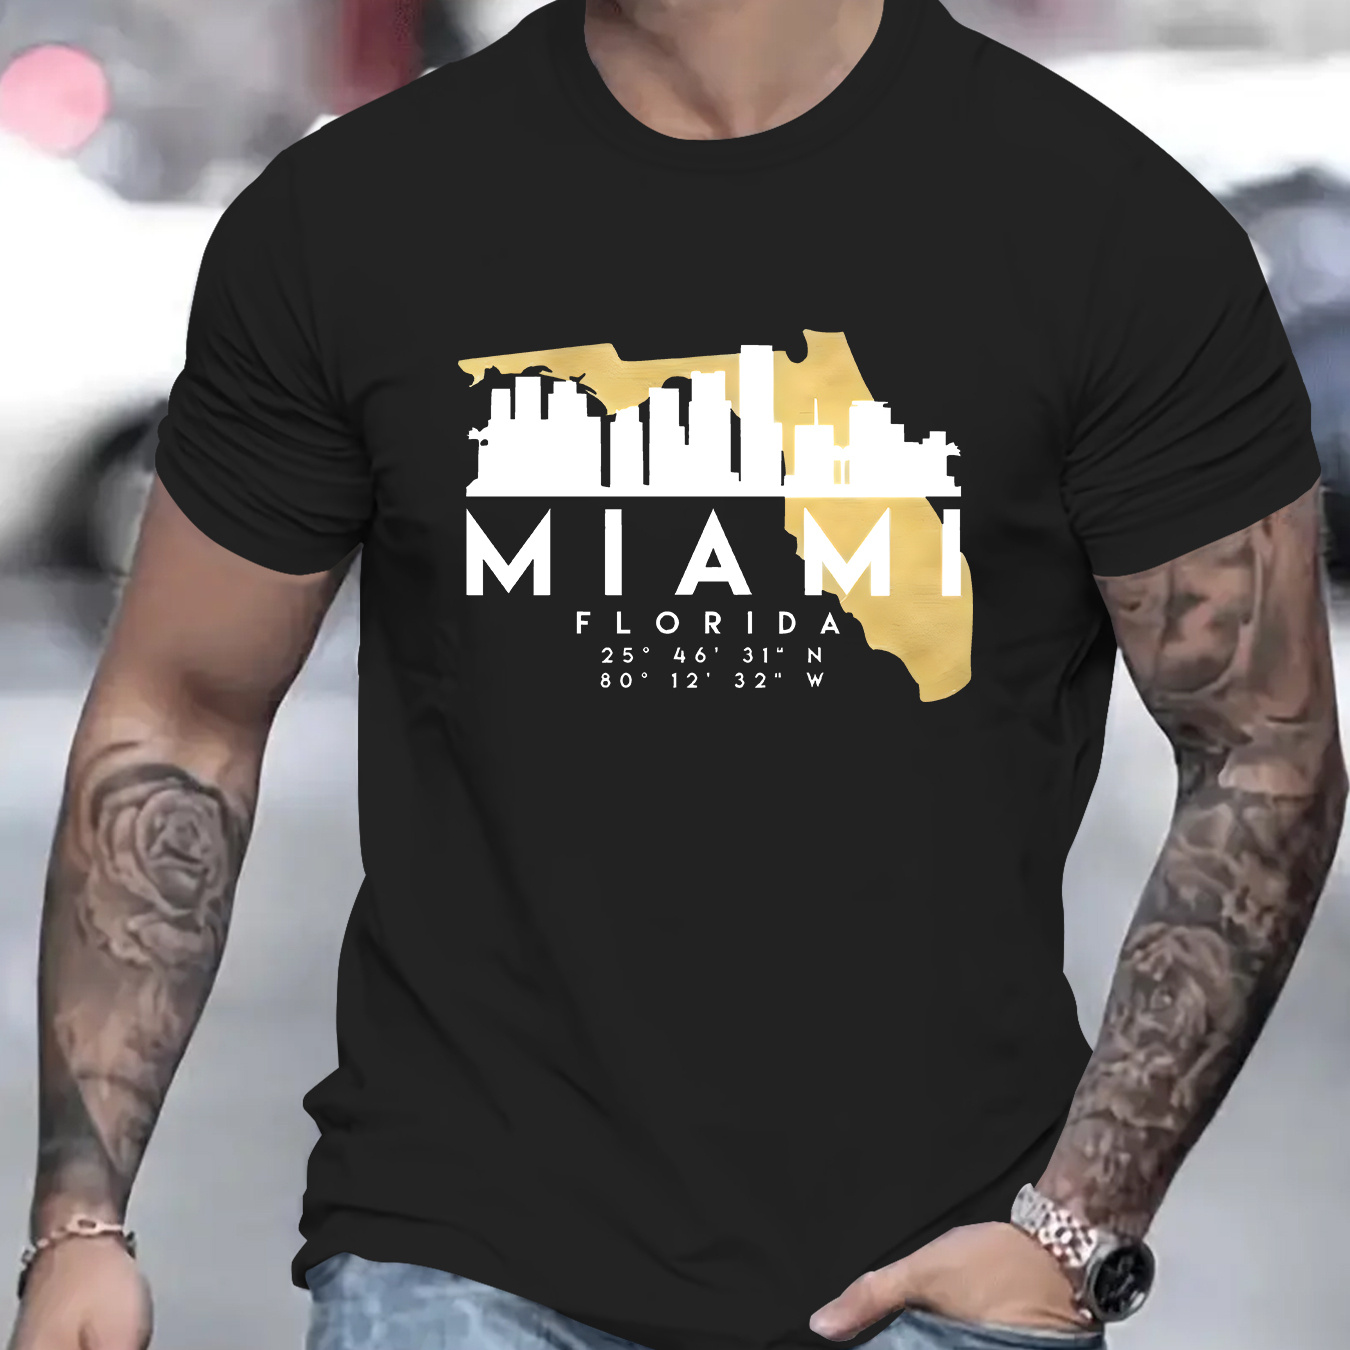 

Men's Casual Short Sleeve, Stylish T-shirt With "miami" Creative Print, Summer Fashion Top, Crew Neck Tee-shirt For Male